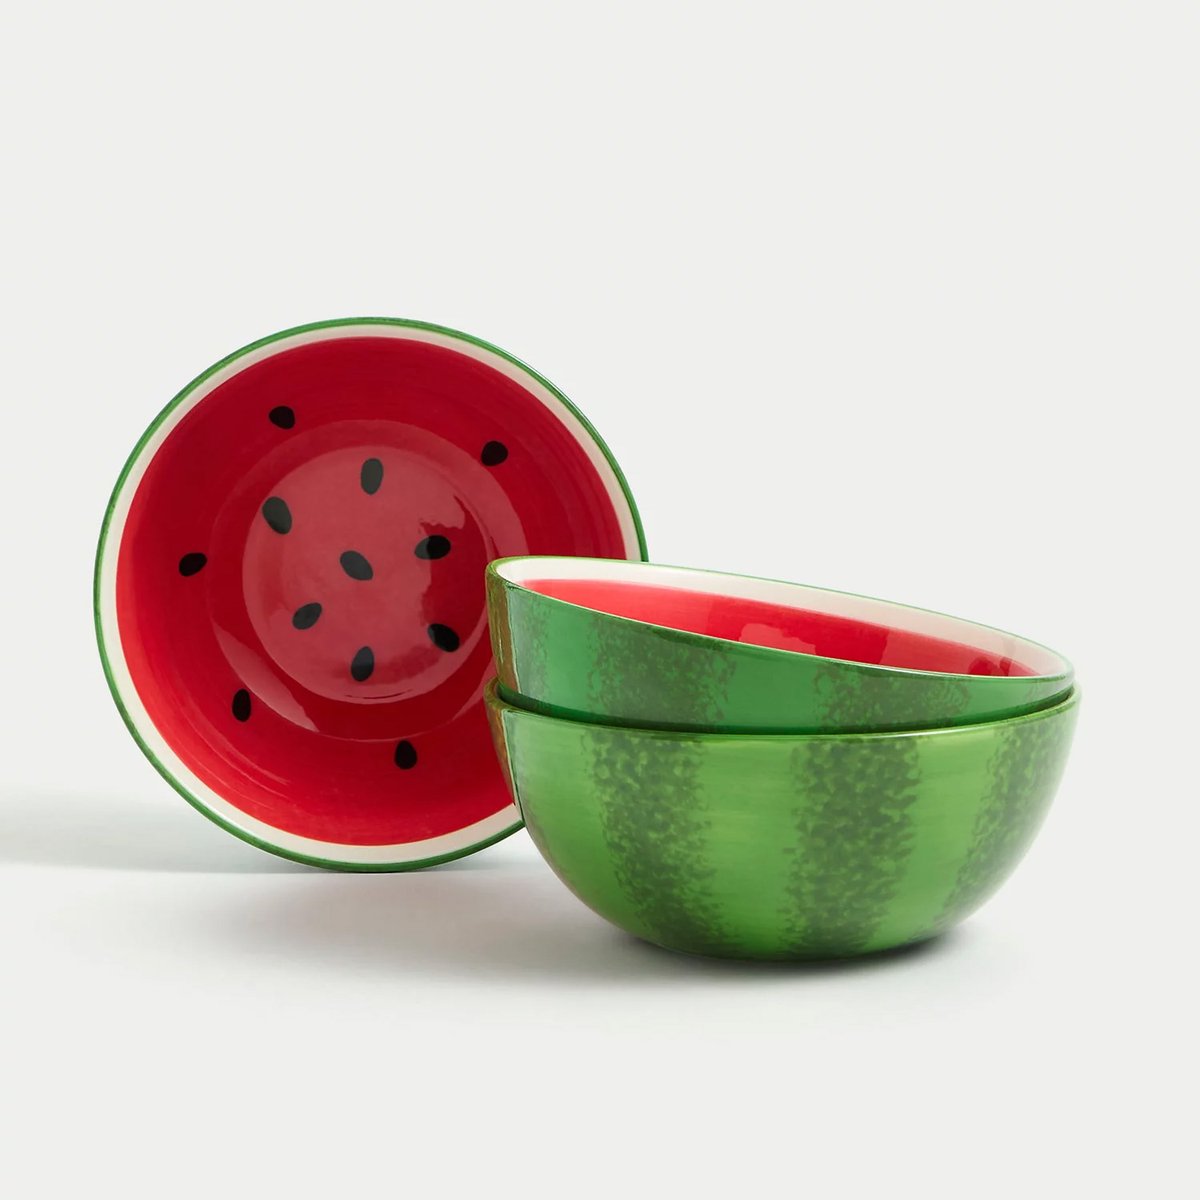 Colourful fruit and vegetable inspired tableware is everywhere right now and we're loving it. See our favourites inc these bowls from @marksandspencer #interiorstrend #tableware bit.ly/3xQ4T8j